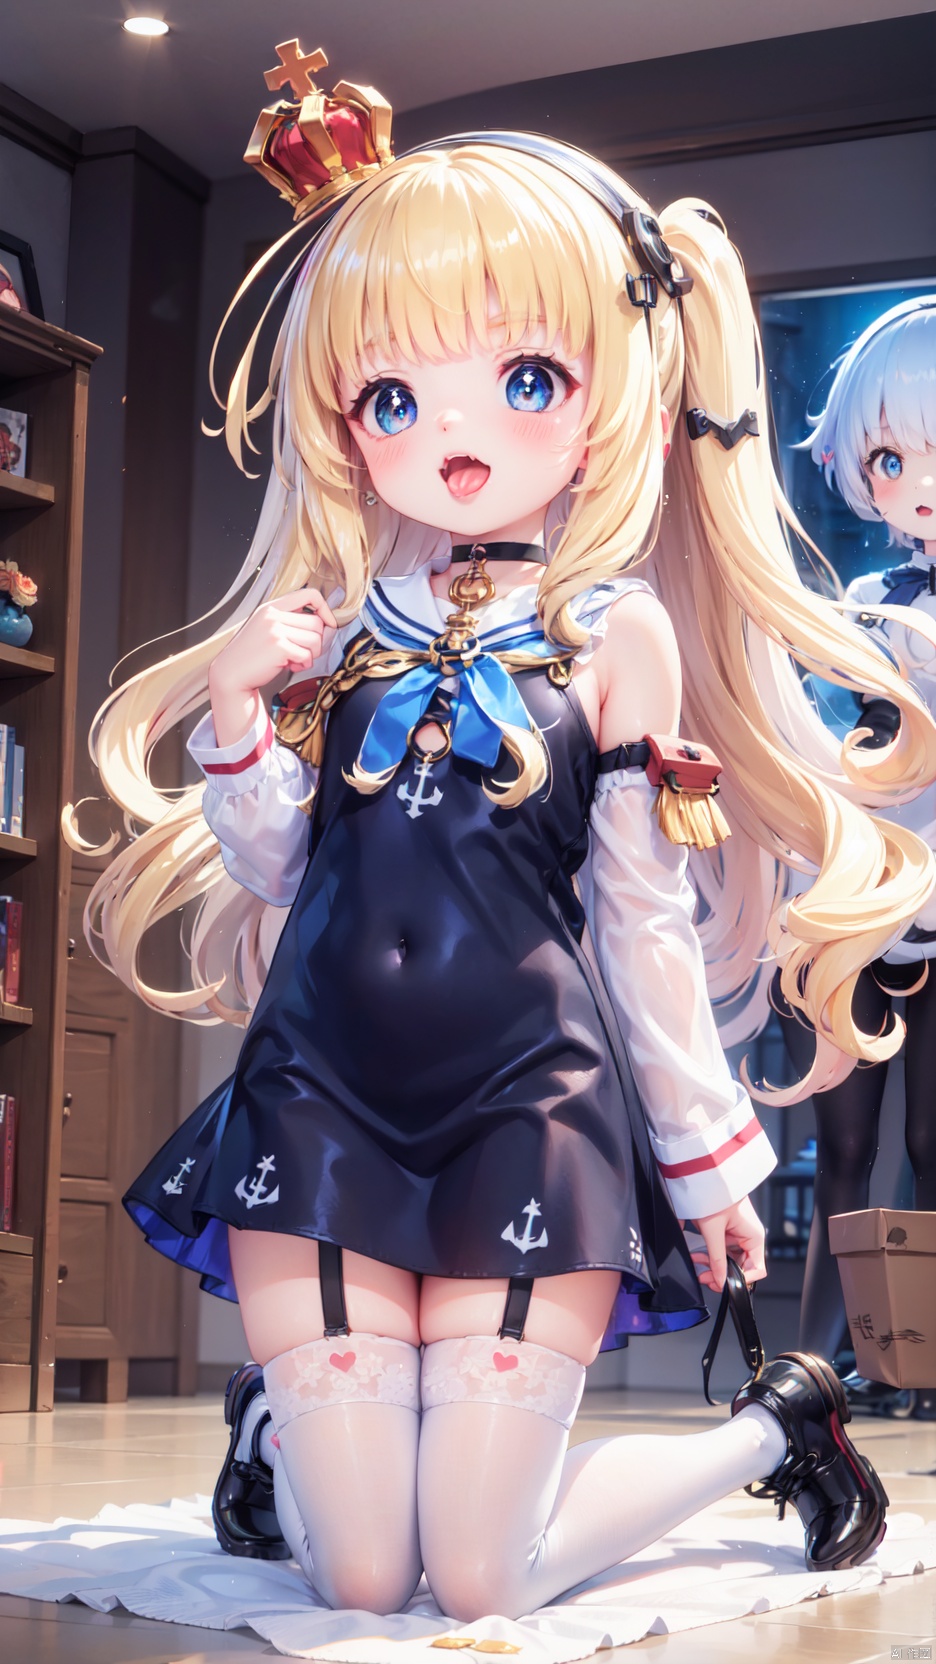 from below,queen elizabeth (azur lane),Little girl(1.5),aged down,beautiful detailed girl,narrow waist,Delicate cute face,princess crown,small crown,anchor choker,(anchor print naval uniform),blue princess dress,ornate clothes,fine fabric emphasis,blue eyes,beautiful detailed eyes,Glowing eyes,((heart-shaped pupils)),((blonde hair)),((hair spread out,wavy hair)),very long shoulder,glowing hair,Extremely delicate hair,Thin leg,white legwear garter,black footwear,Slender fingers,steepled fingers,shiny nails,((kneeling,**********)),ahegao(expression),smile,open mouth,tongue out,licking lips,drooling,heavy breathing,fangs out,big fangs,puffy cheeks,beautiful detailed mouth,looking down at viewer,anchor (ornament),warship,harbor,royal navy (emblem),royal navy flag,hyper realistic,magic,4k,incredible quality,best quality,masterpiece,highly detailed,extremely detailed CG,cinematic lighting,light particle,backlighting,full body,high definition,detail enhancement,(perfect hands, perfect anatomy),8k_wallpaper,extreme details,colorful